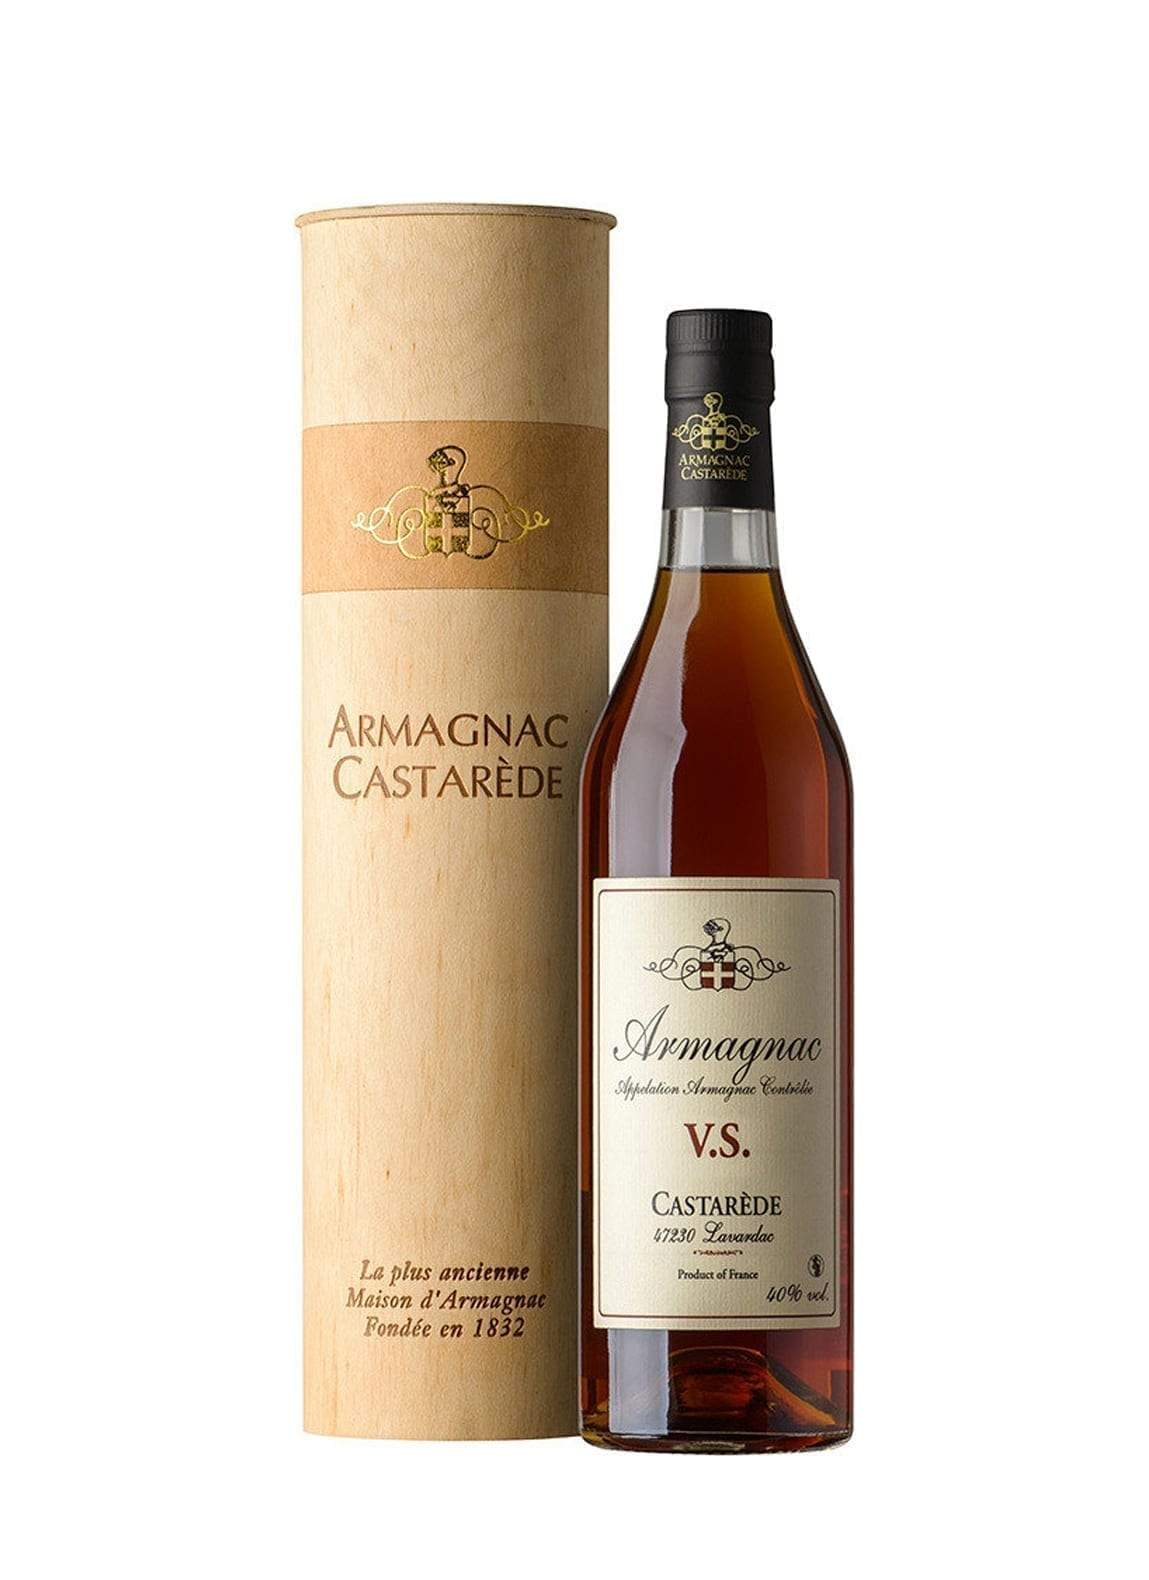 Castarde VS (Dominant Folle Blanche) 2-3 years 42.5% 500ml | Brandy | Shop online at Spirits of France